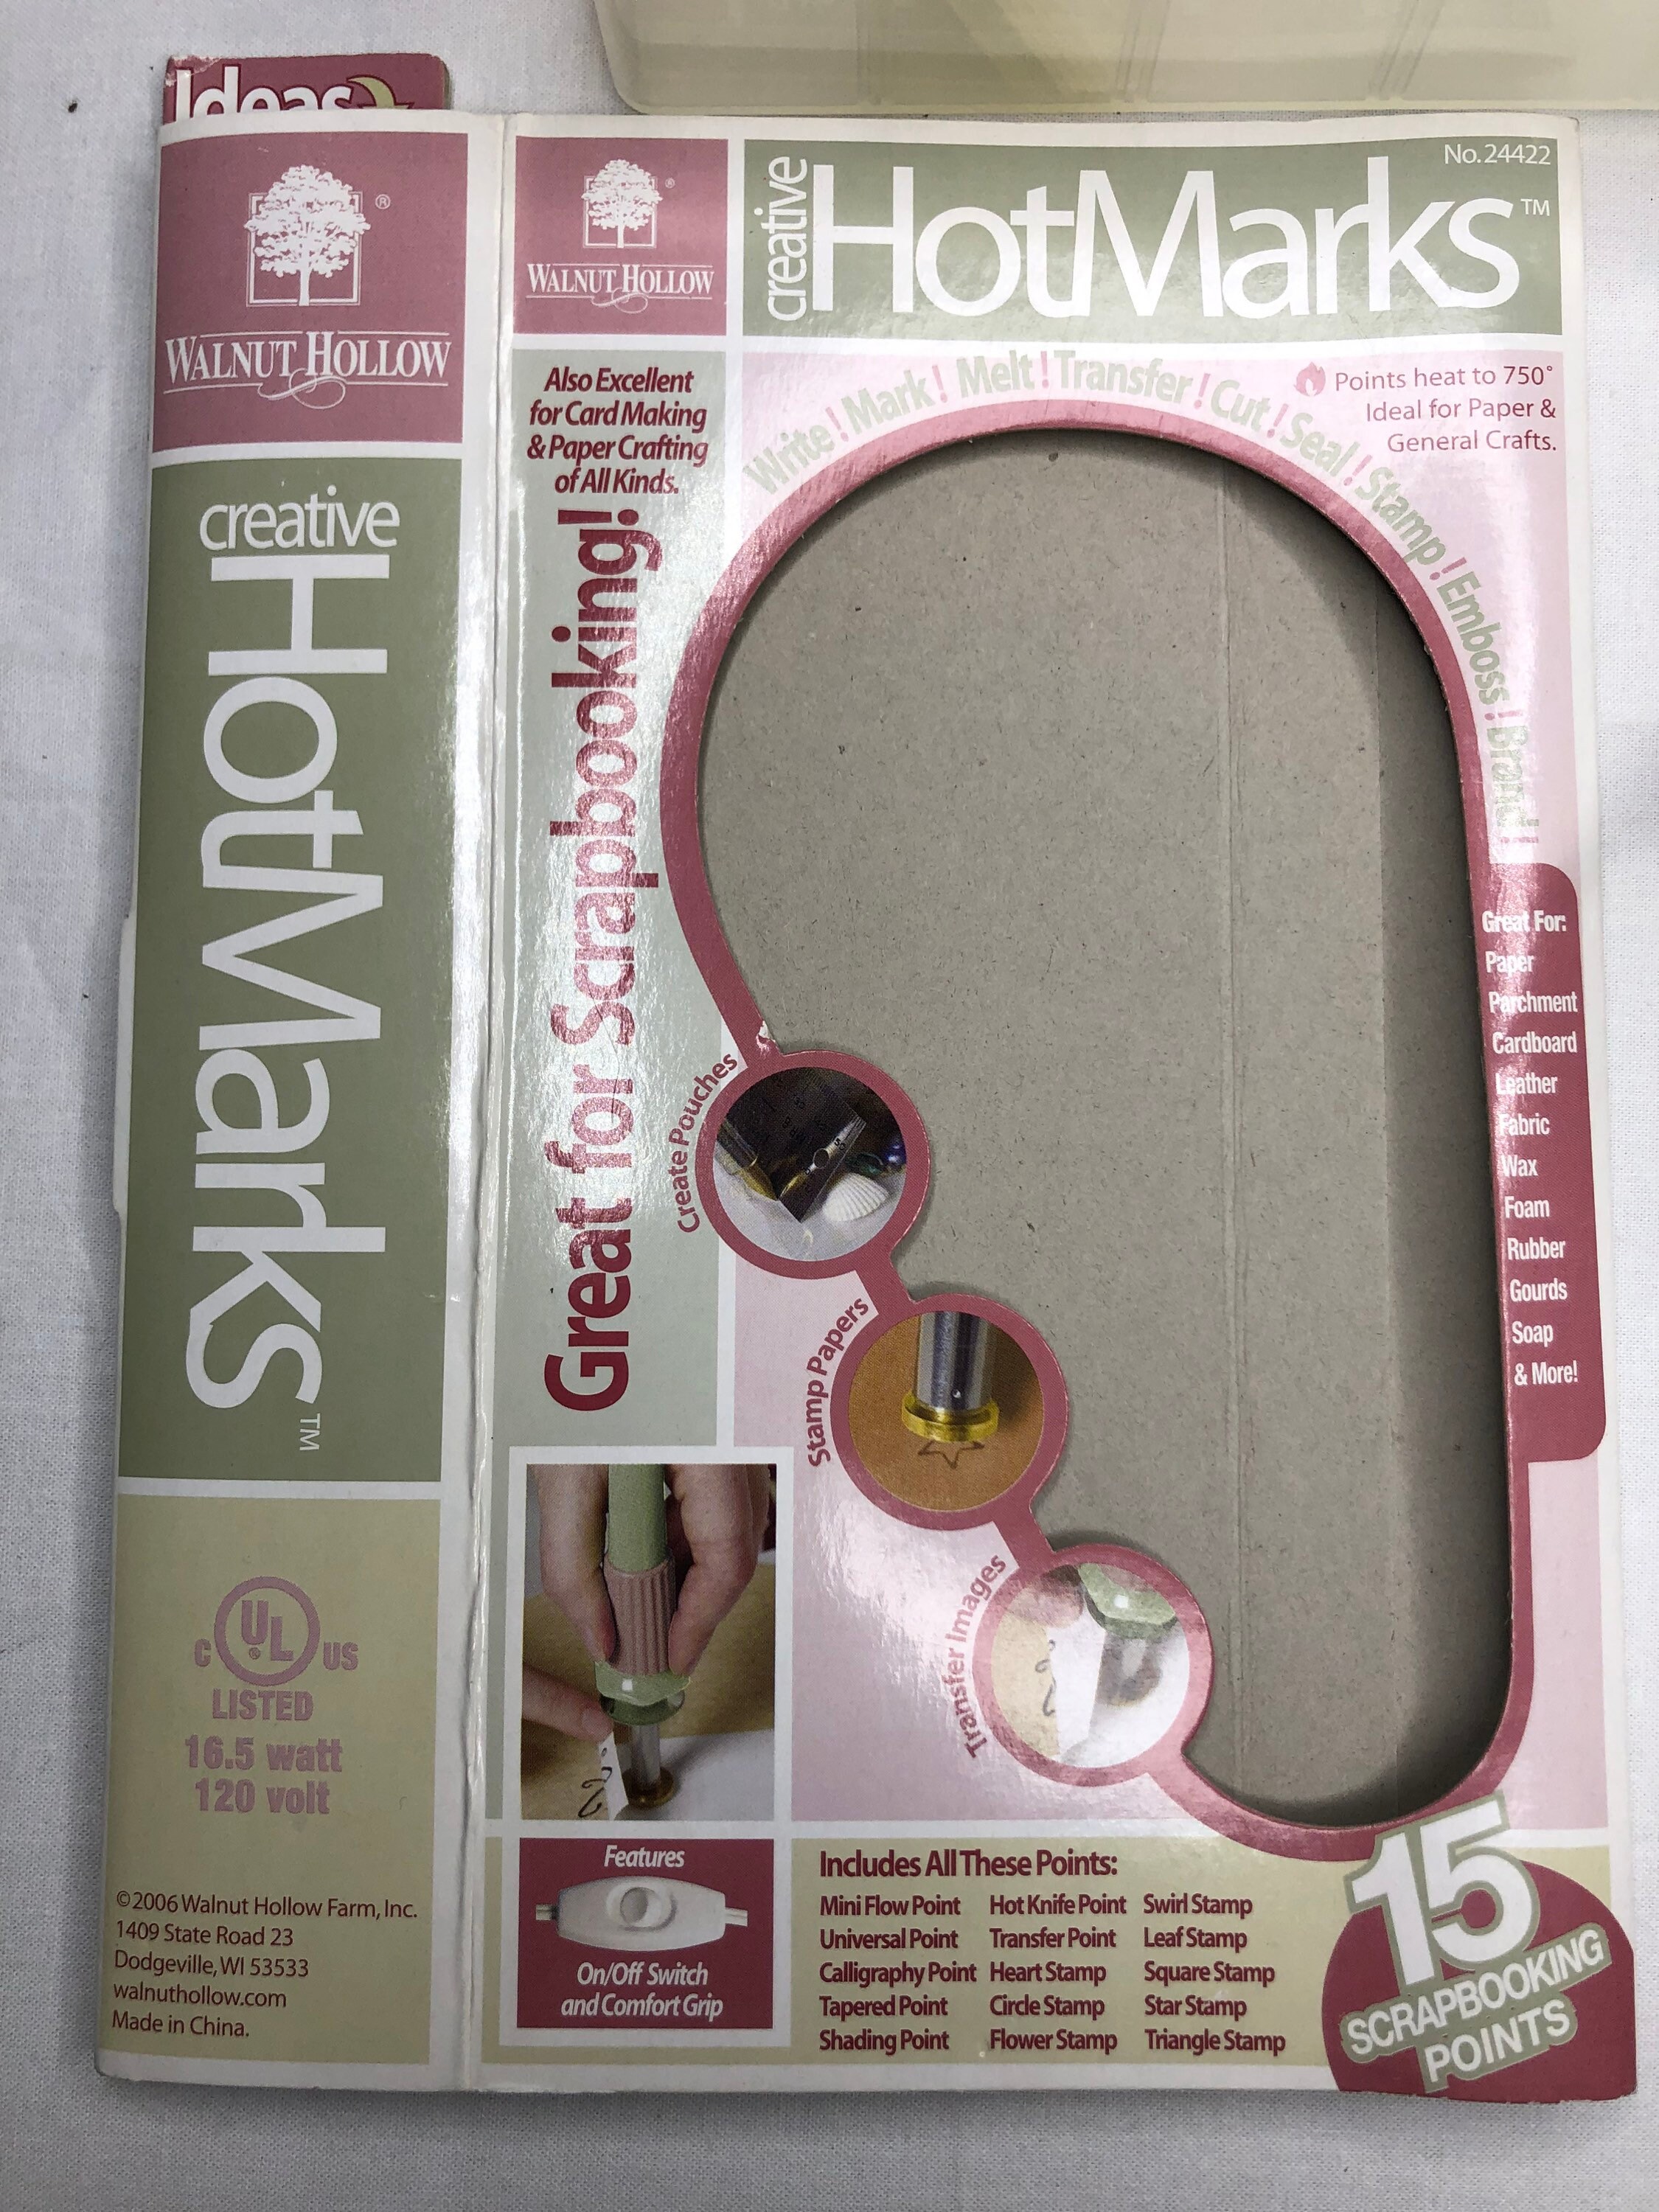 Walnut Hollow Creative Hot Marks No. 24422 With 15 Scrapbooking Points Card  Making Paper Crafts Complete 